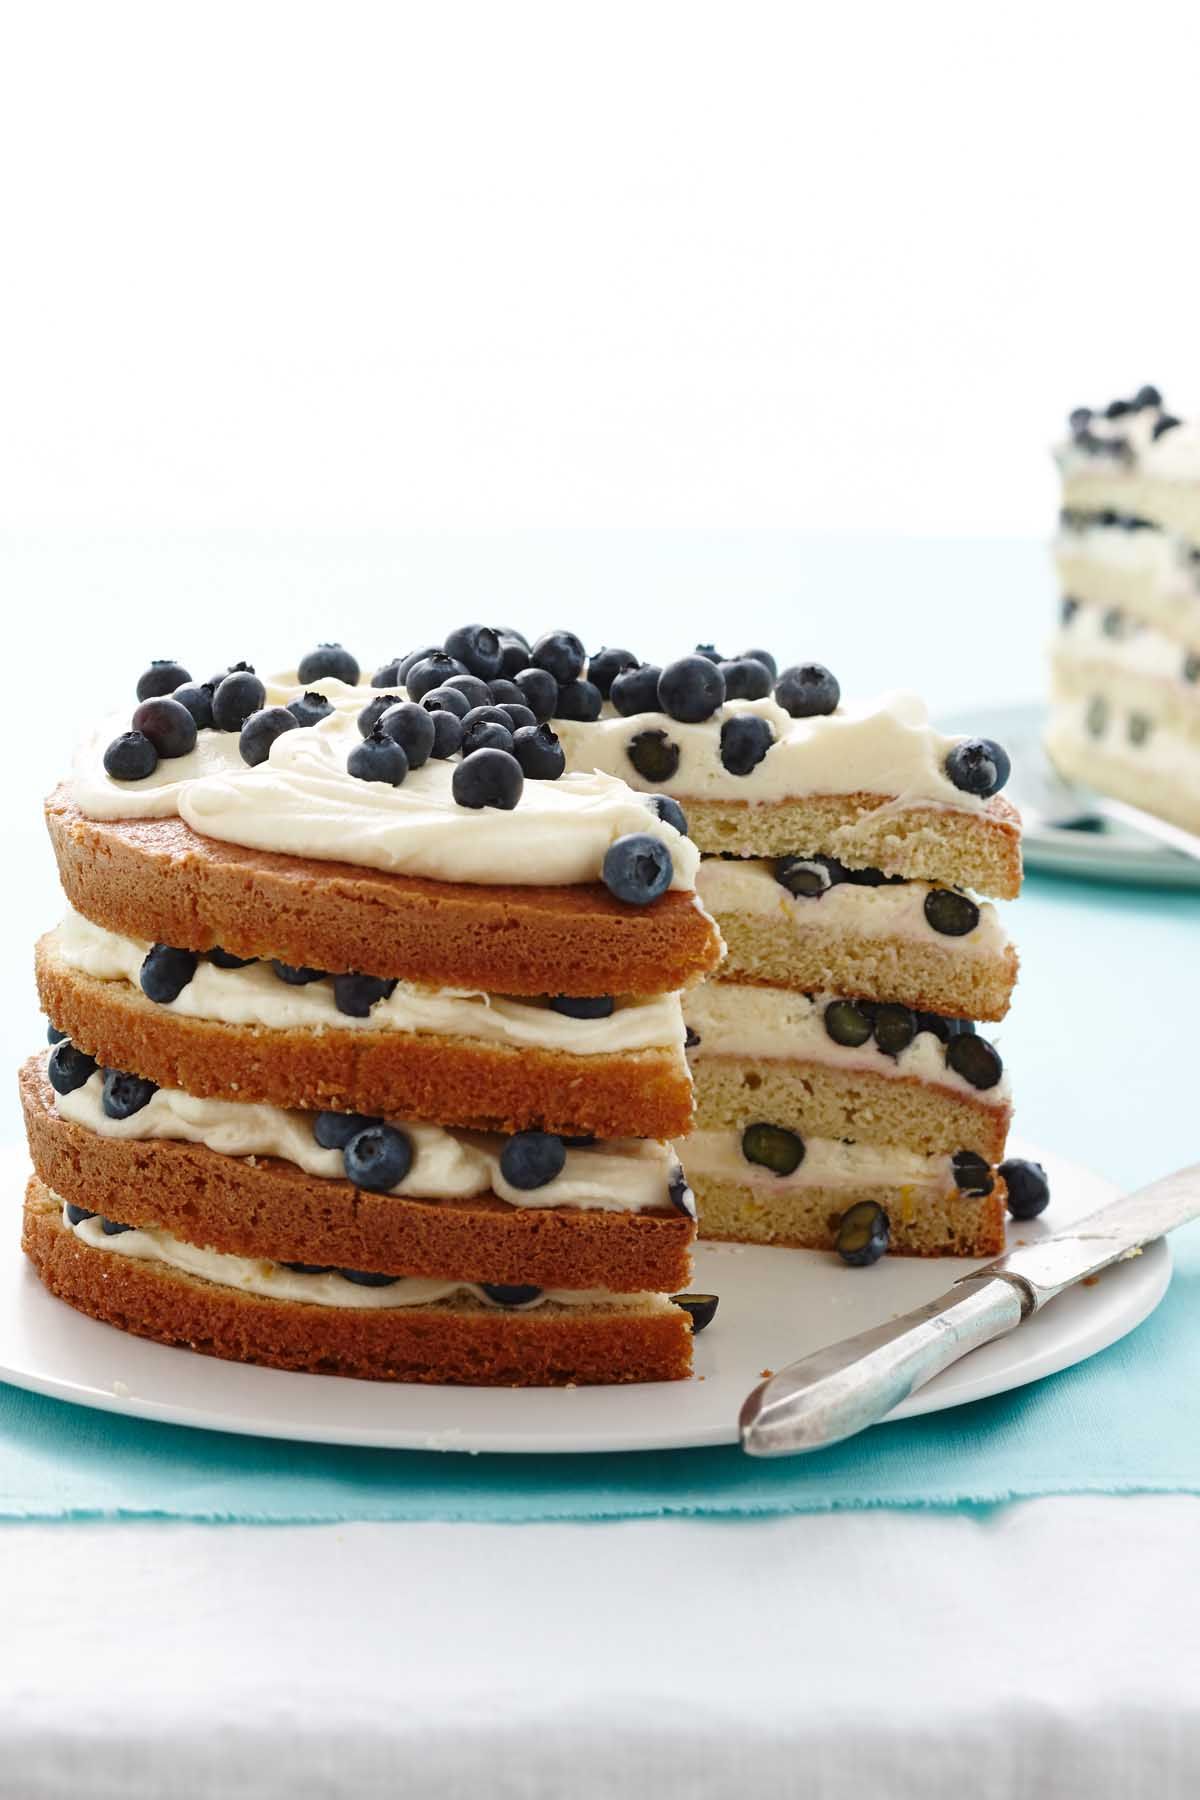 25 Best Fathers Day Cakes 2022 — Easy Fathers Day Cake Ideas and Recipes image